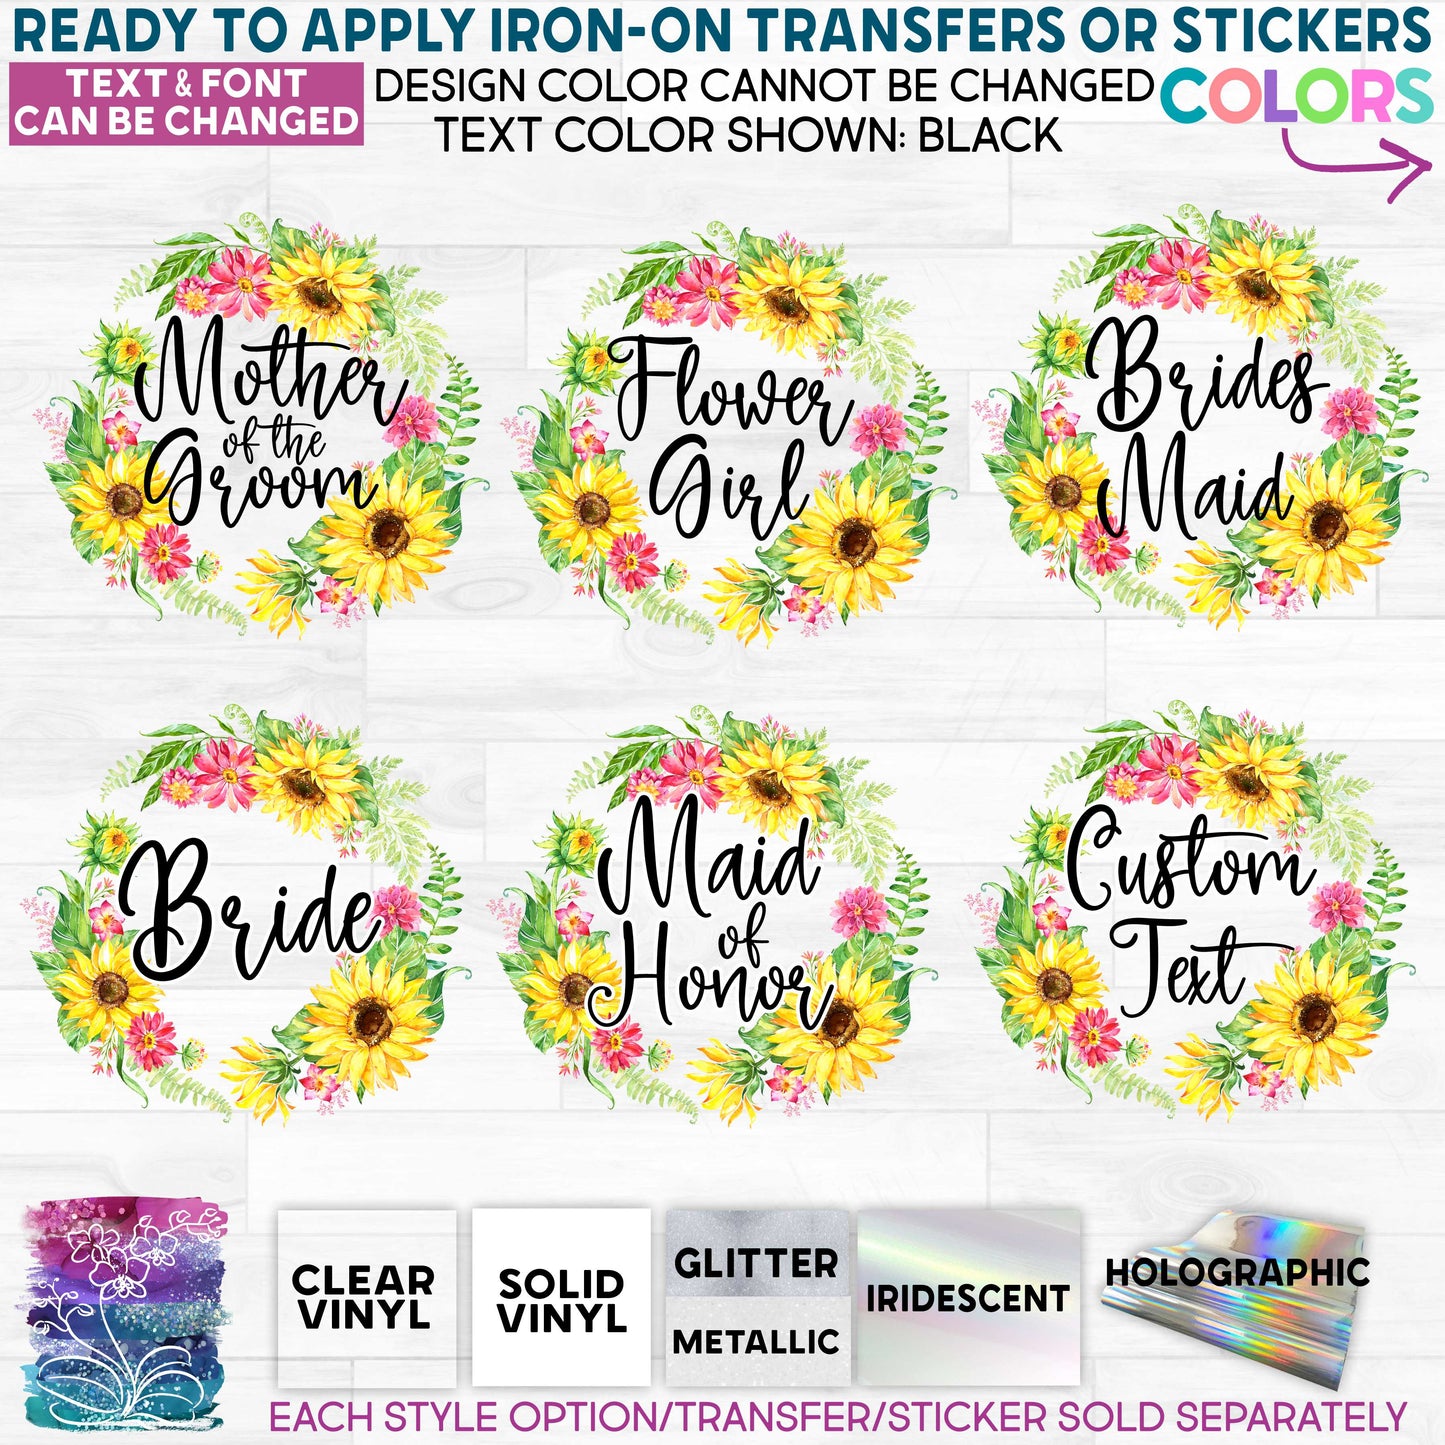 (s045-2A) Bridal Wedding Party Sunflower Floral Flowers Watercolor Glitter or Vinyl Iron-On Transfer or Sticker